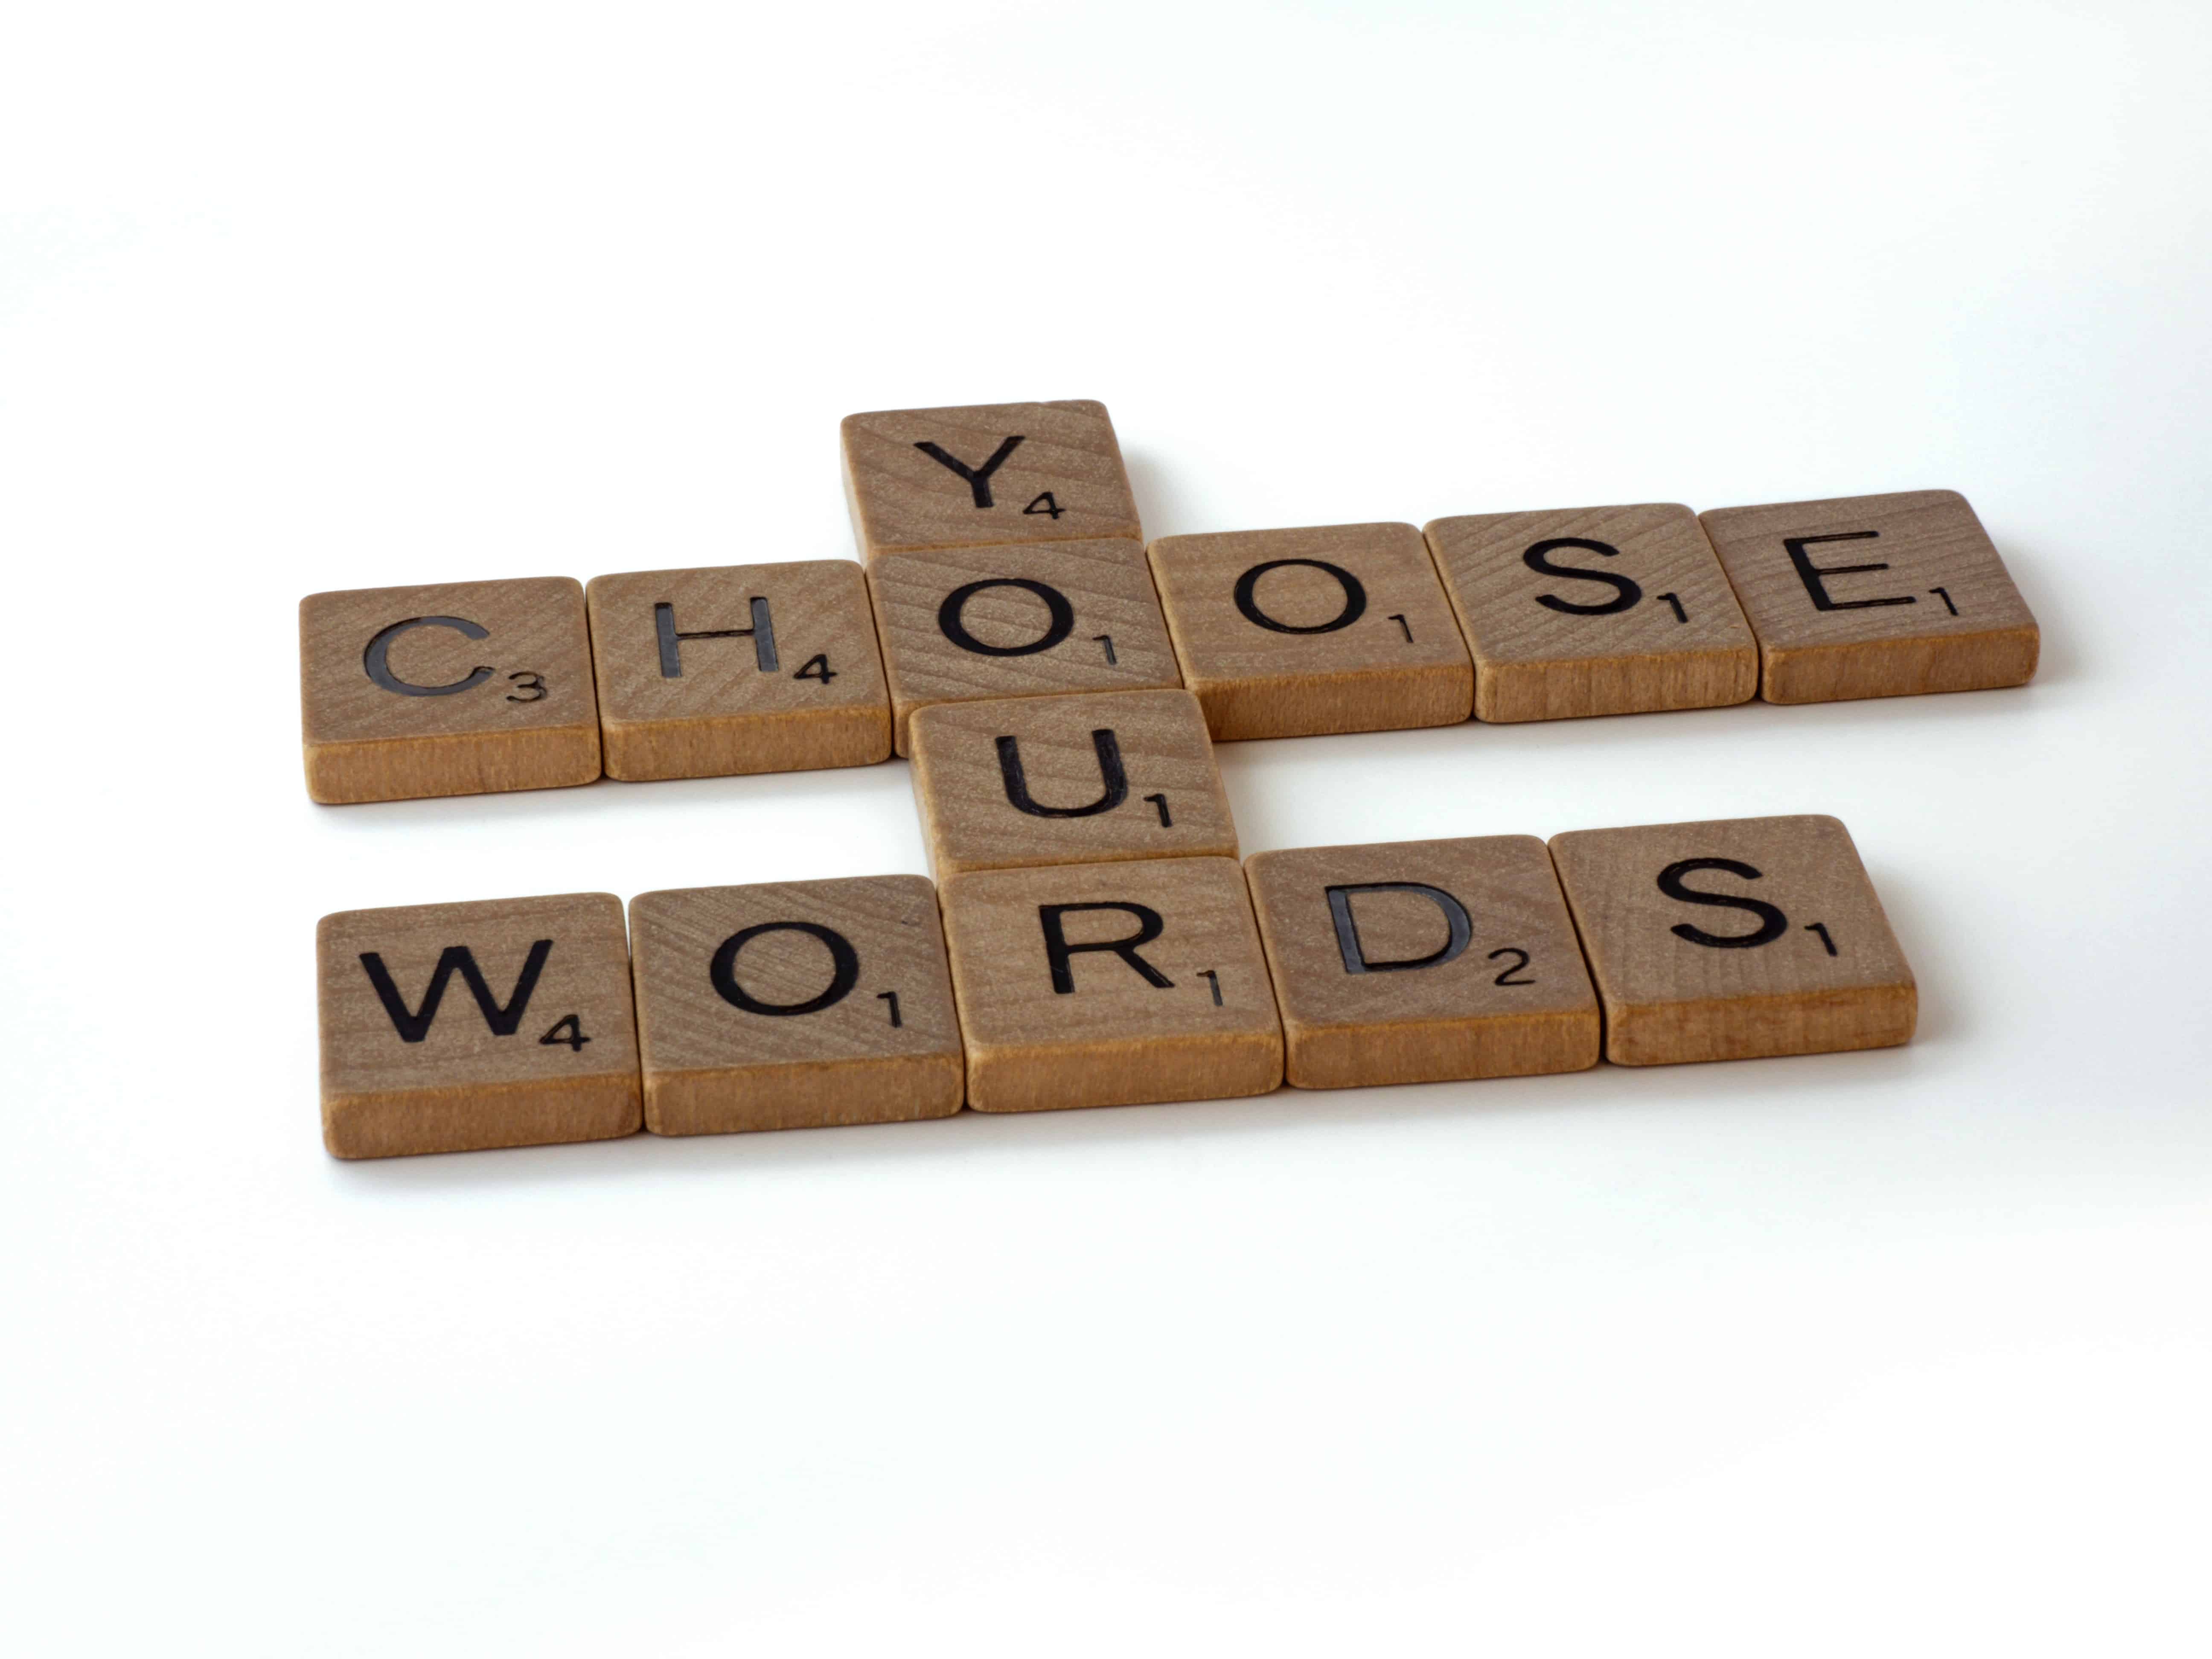 Scrabble tiles laid out reading "choose your words"